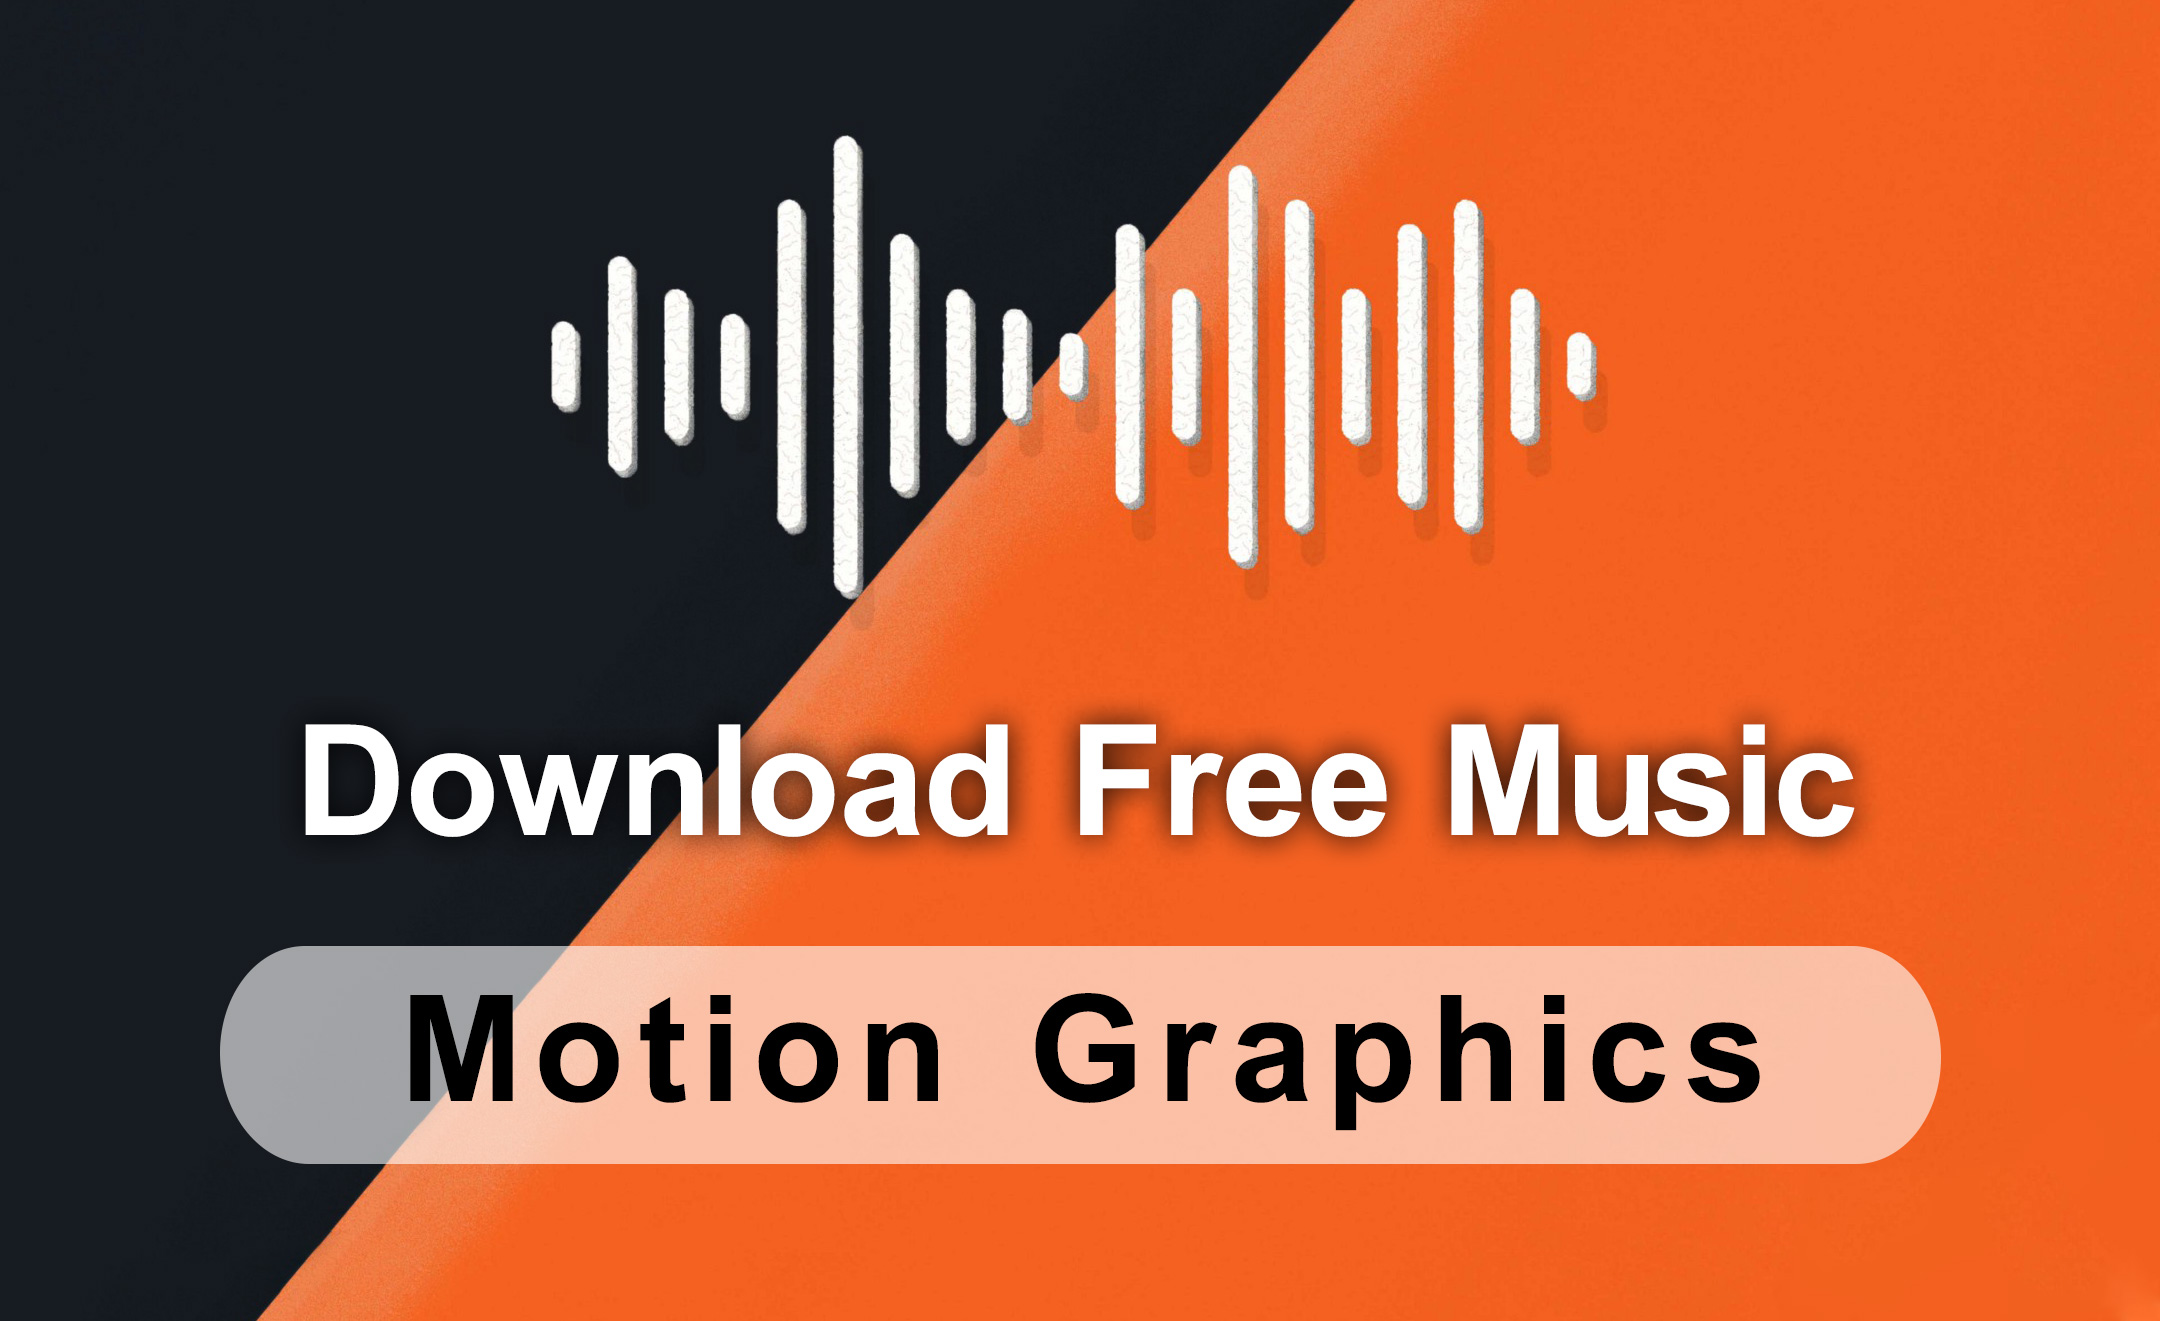 Download free background music for Motion Graphics | The Voice Bank